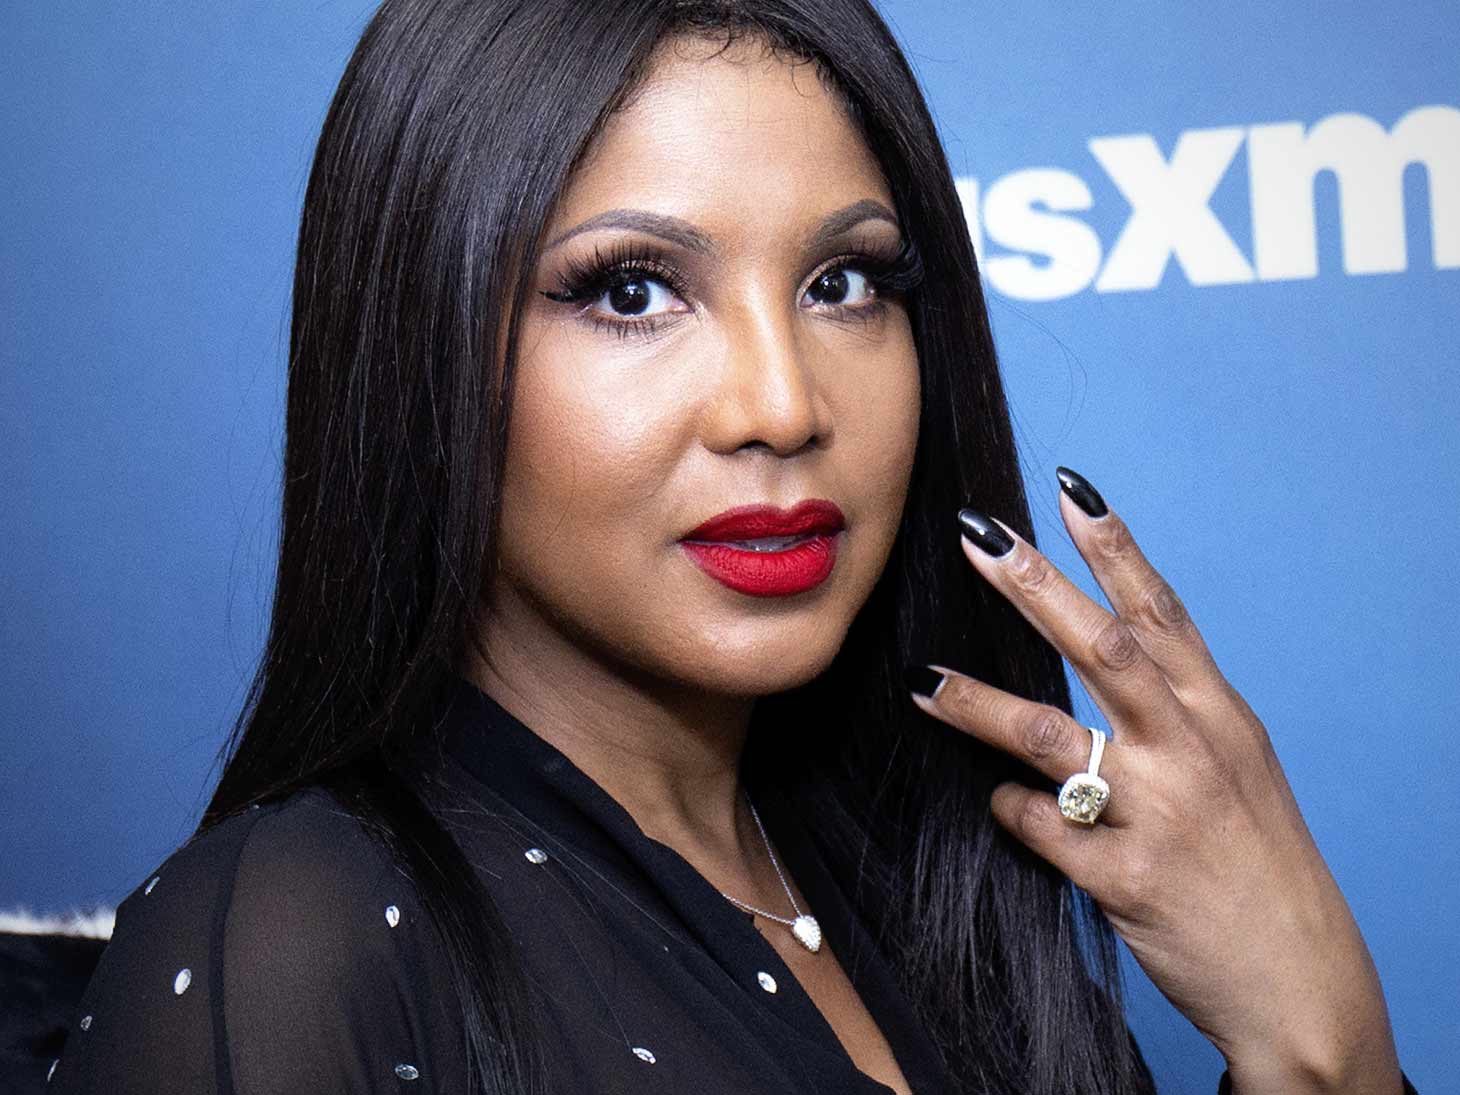 Toni Braxton Has An Emotional Message For Her Fans